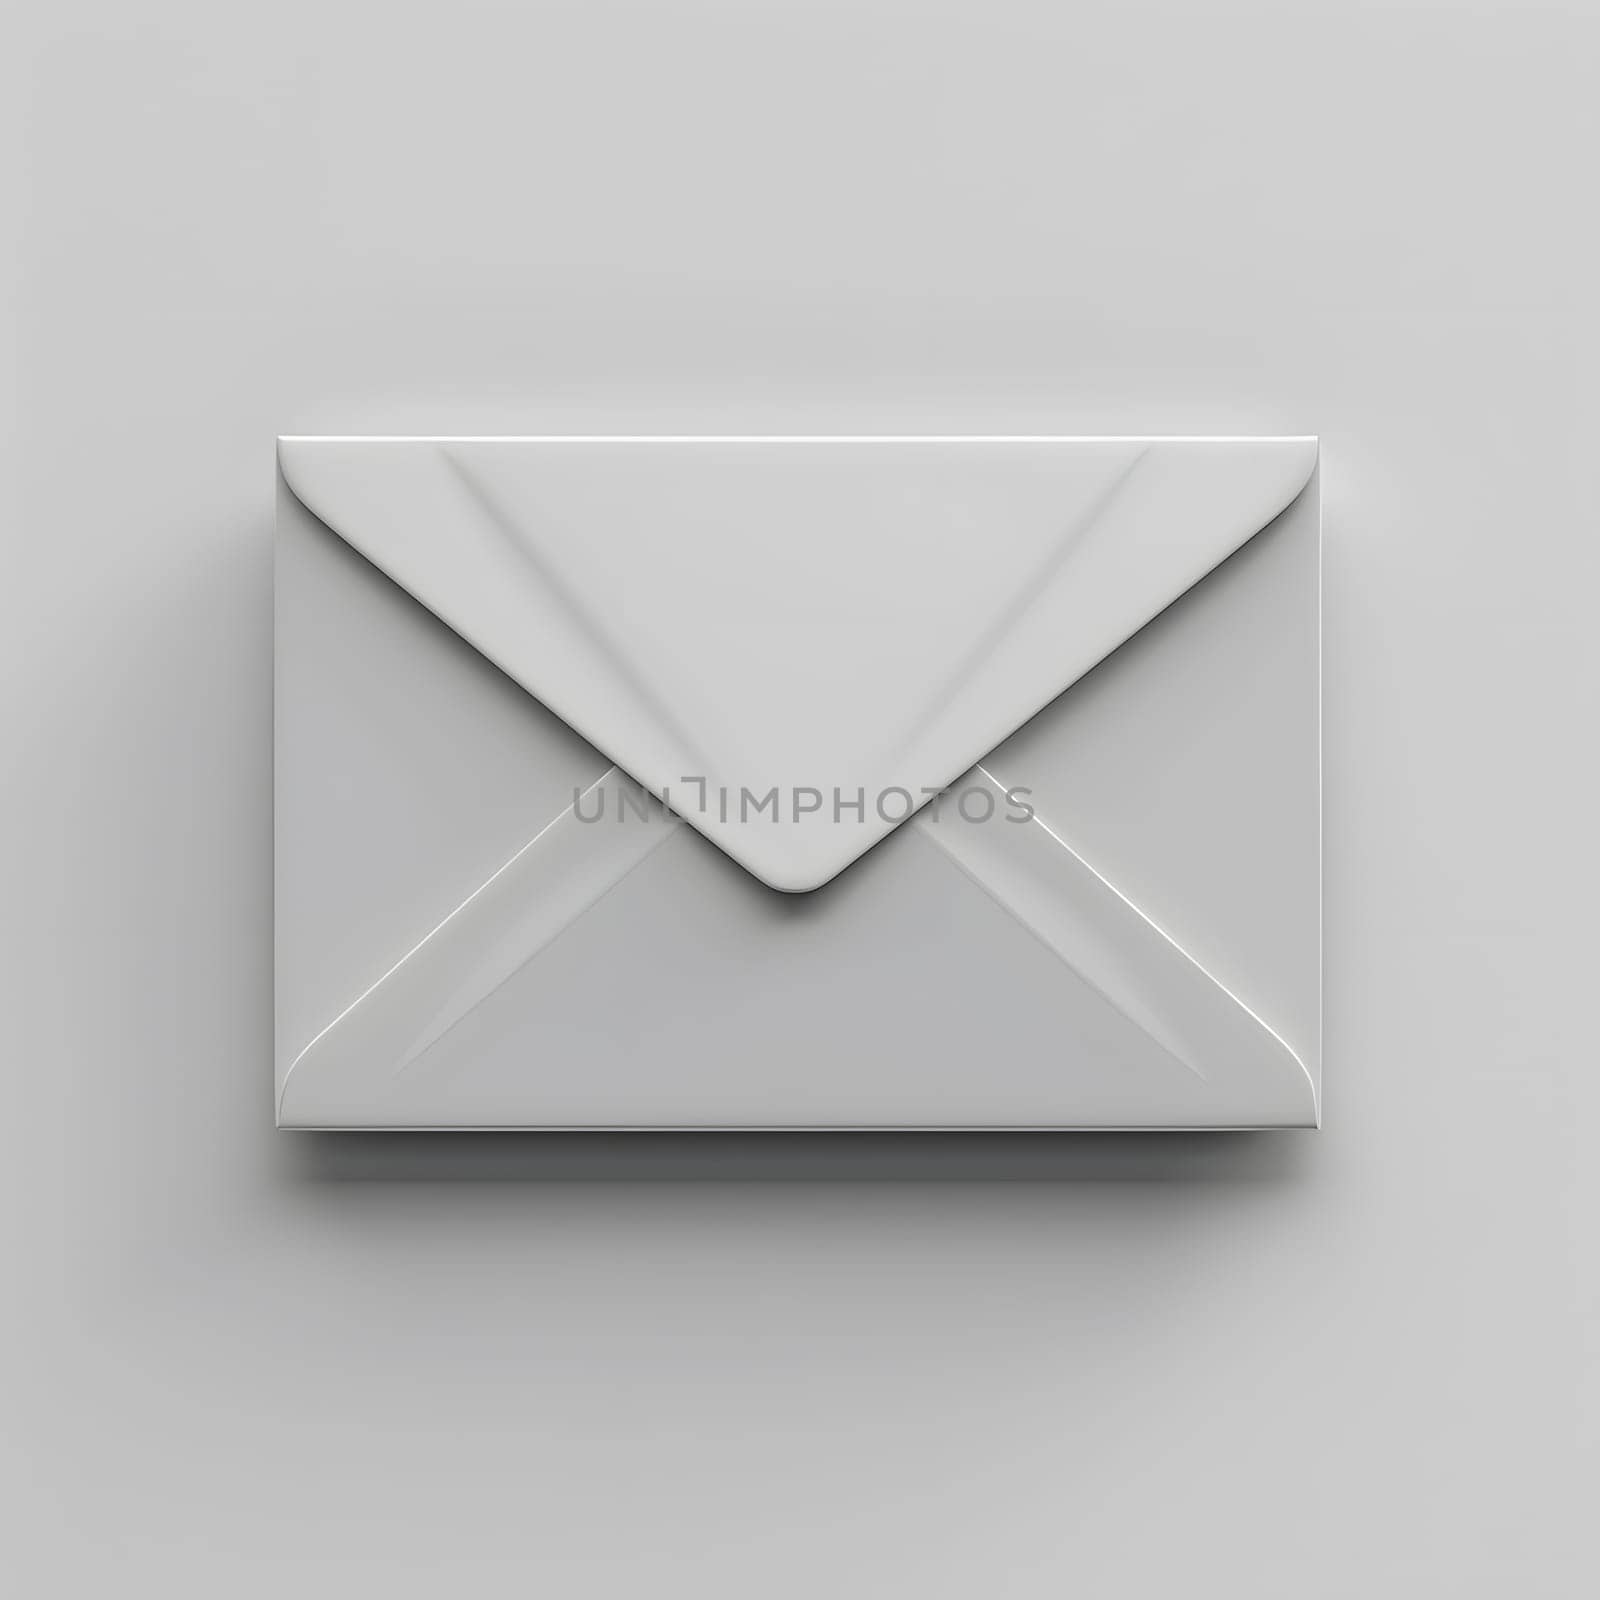 A white rectangle envelope rests on a white surface by Nadtochiy